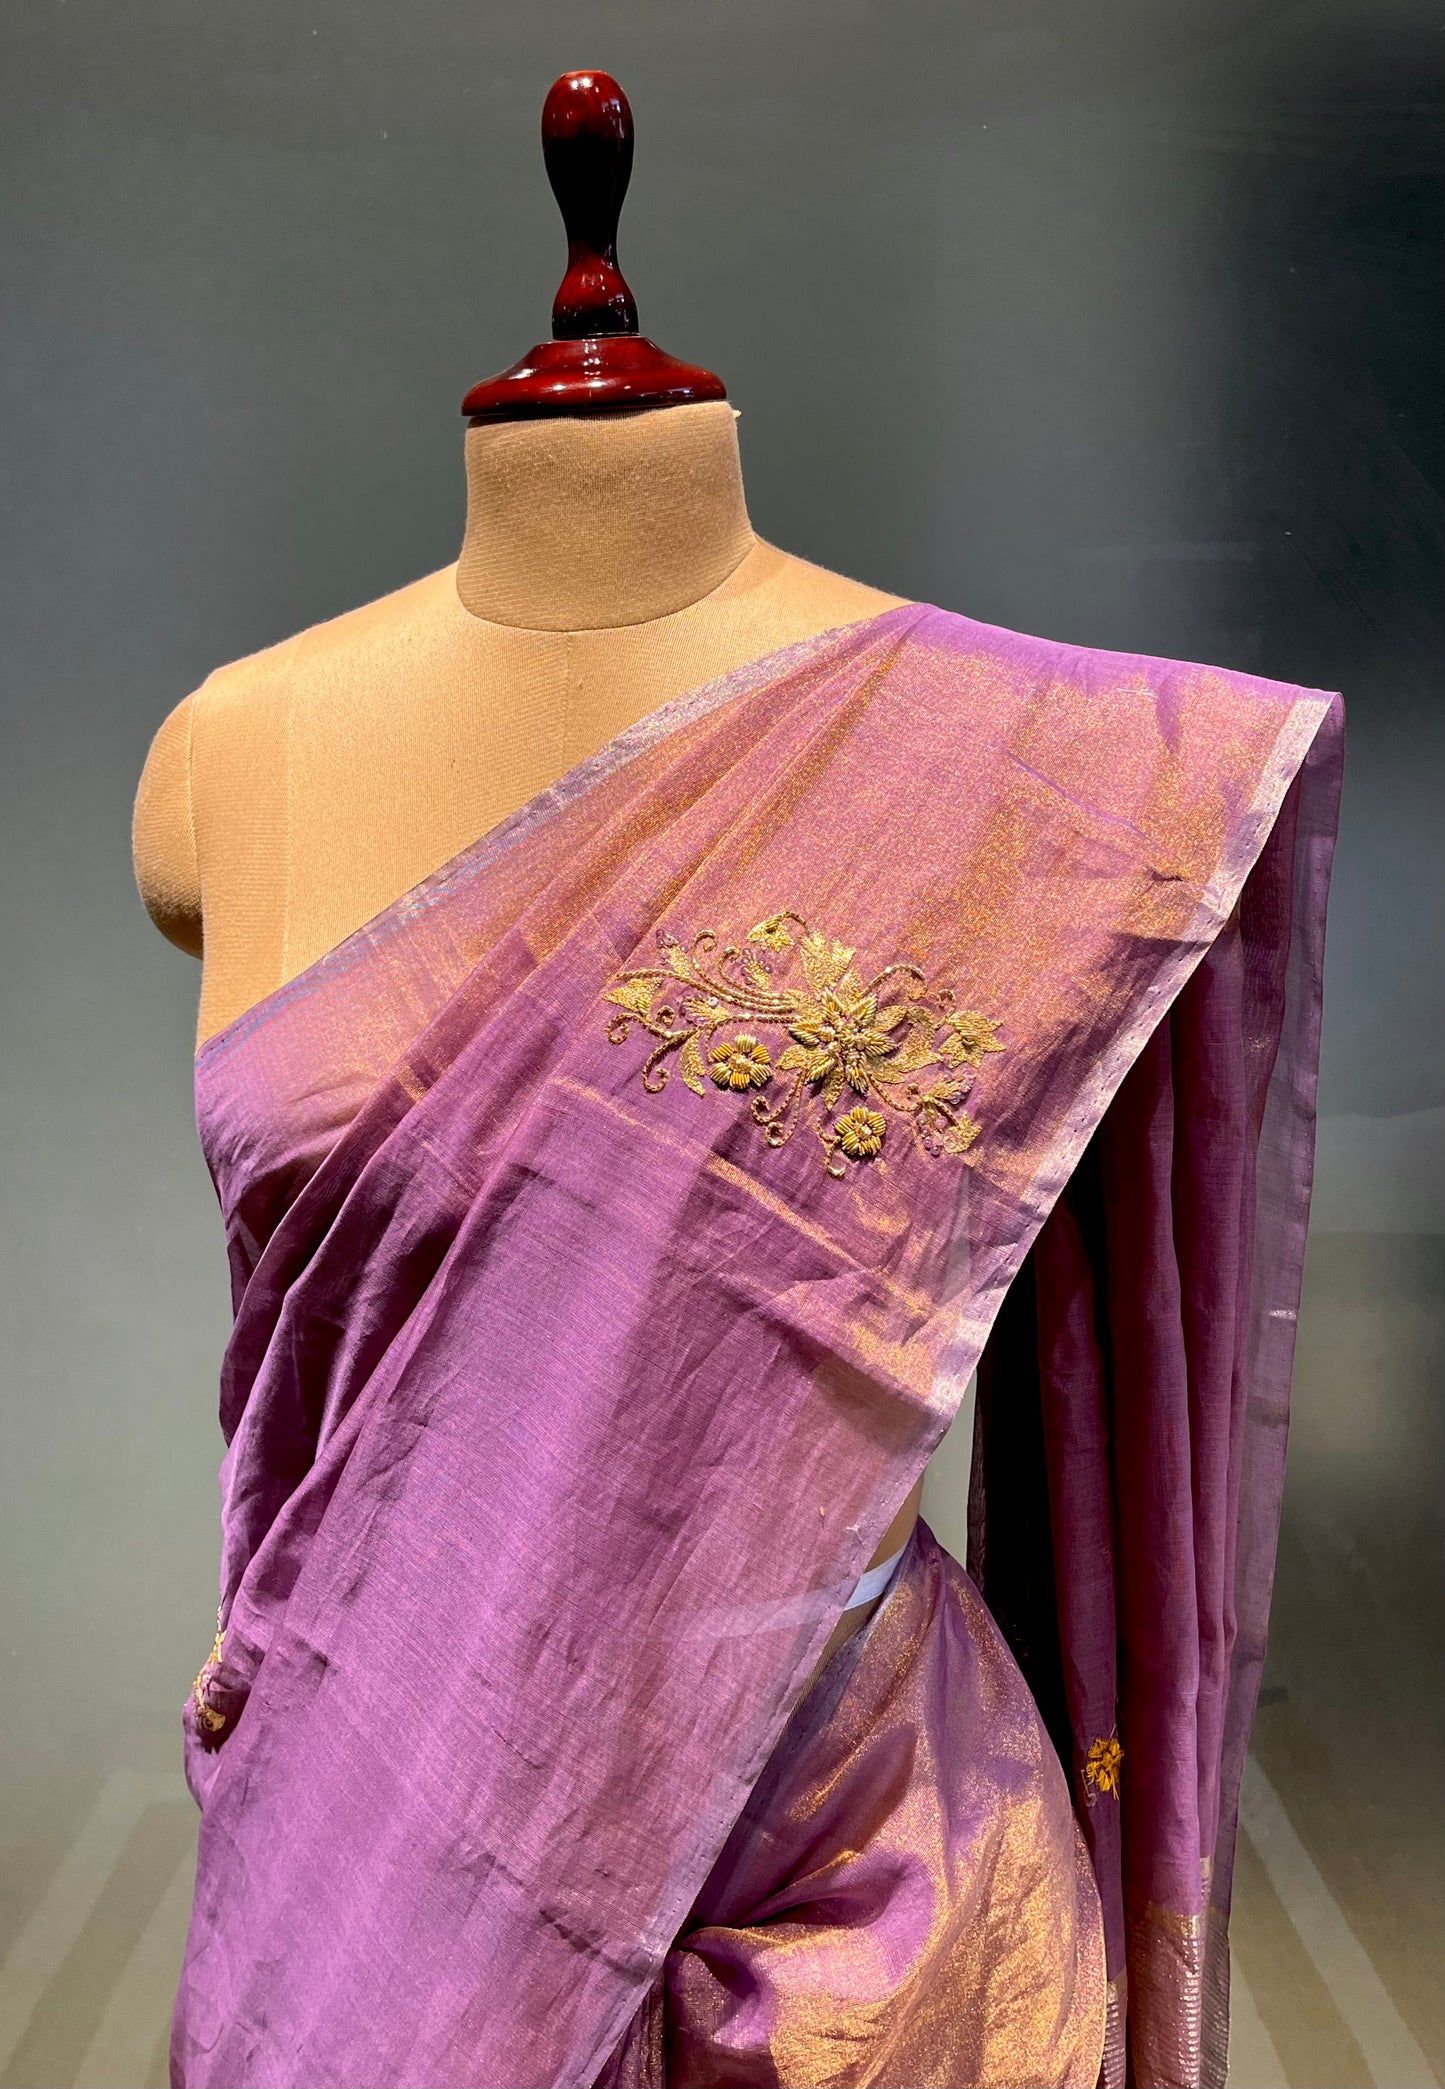 PURPLE COLOUR HAND EMBROIDERED TISSUE SAREE EMBELLISHED WITH ZARDOZI WORK